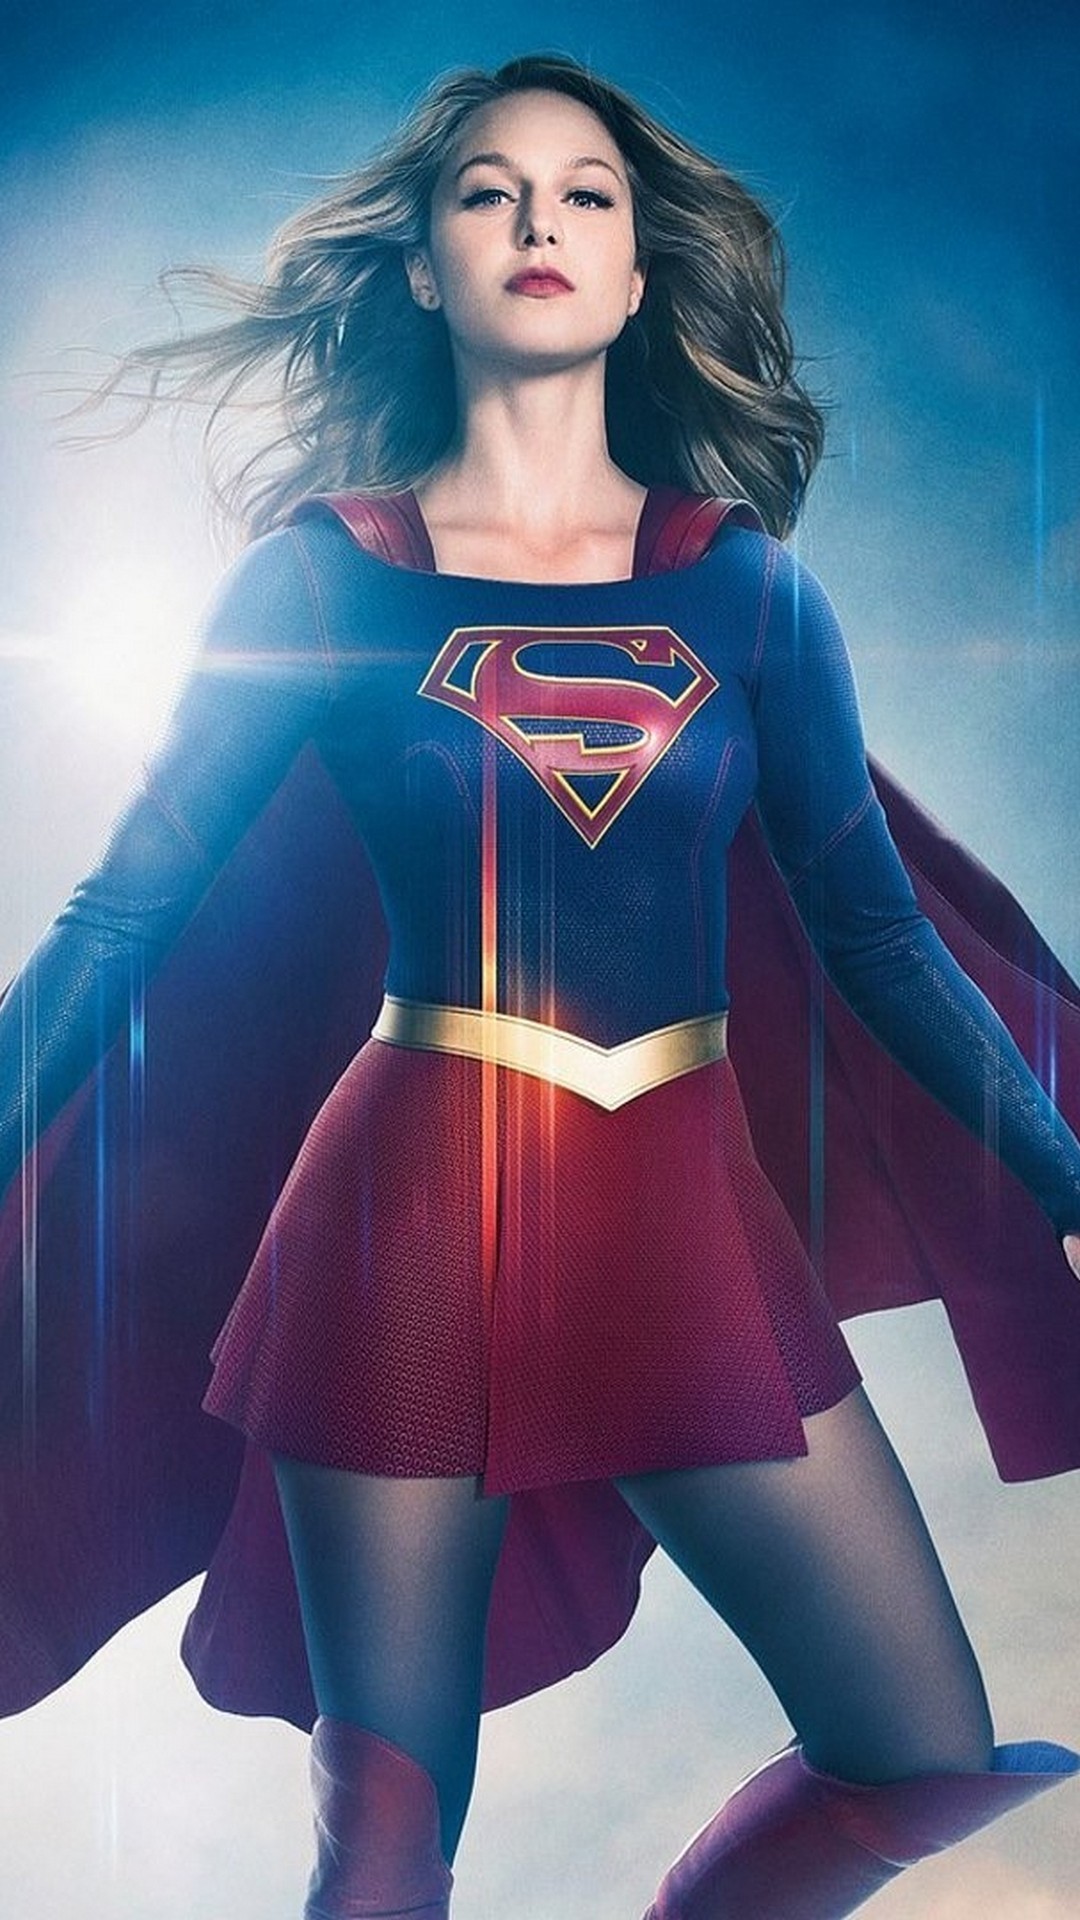 Supergirl iPhone 7 Wallpaper With high-resolution 1080X1920 pixel. You can use this wallpaper for your iPhone 5, 6, 7, 8, X, XS, XR backgrounds, Mobile Screensaver, or iPad Lock Screen